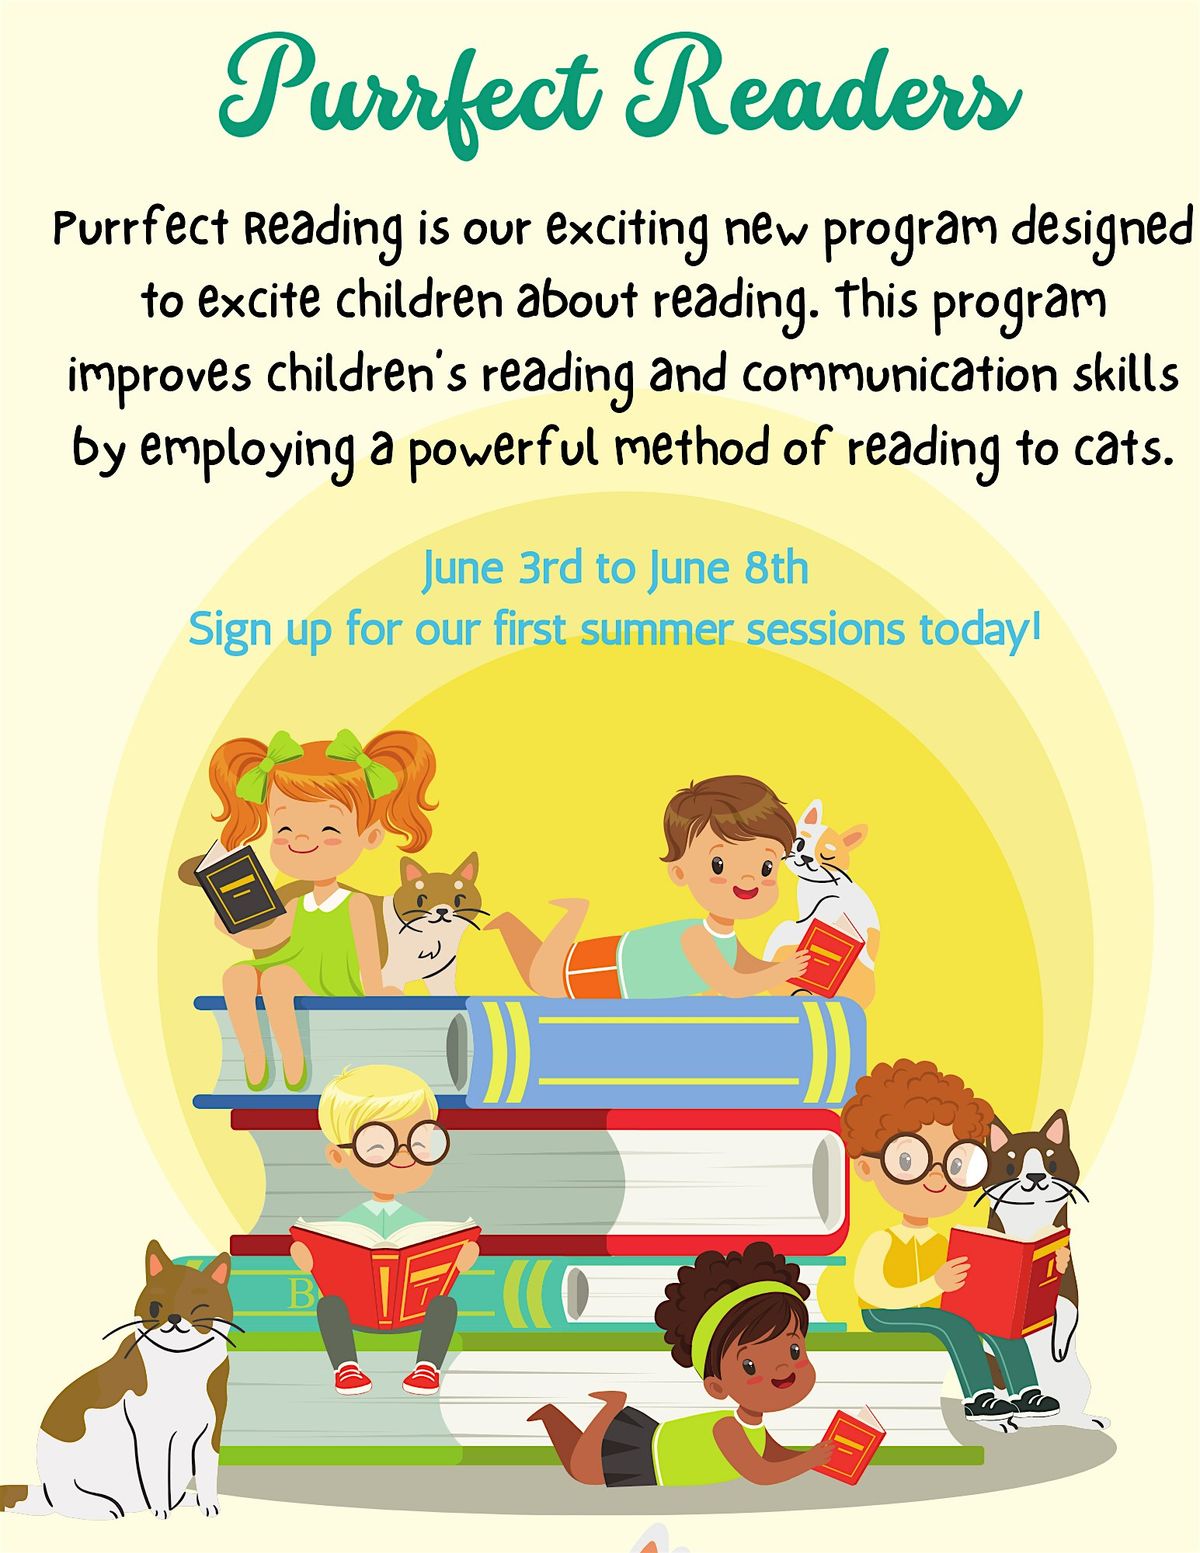 Purrfect Readers Camp (Ages 8-11)